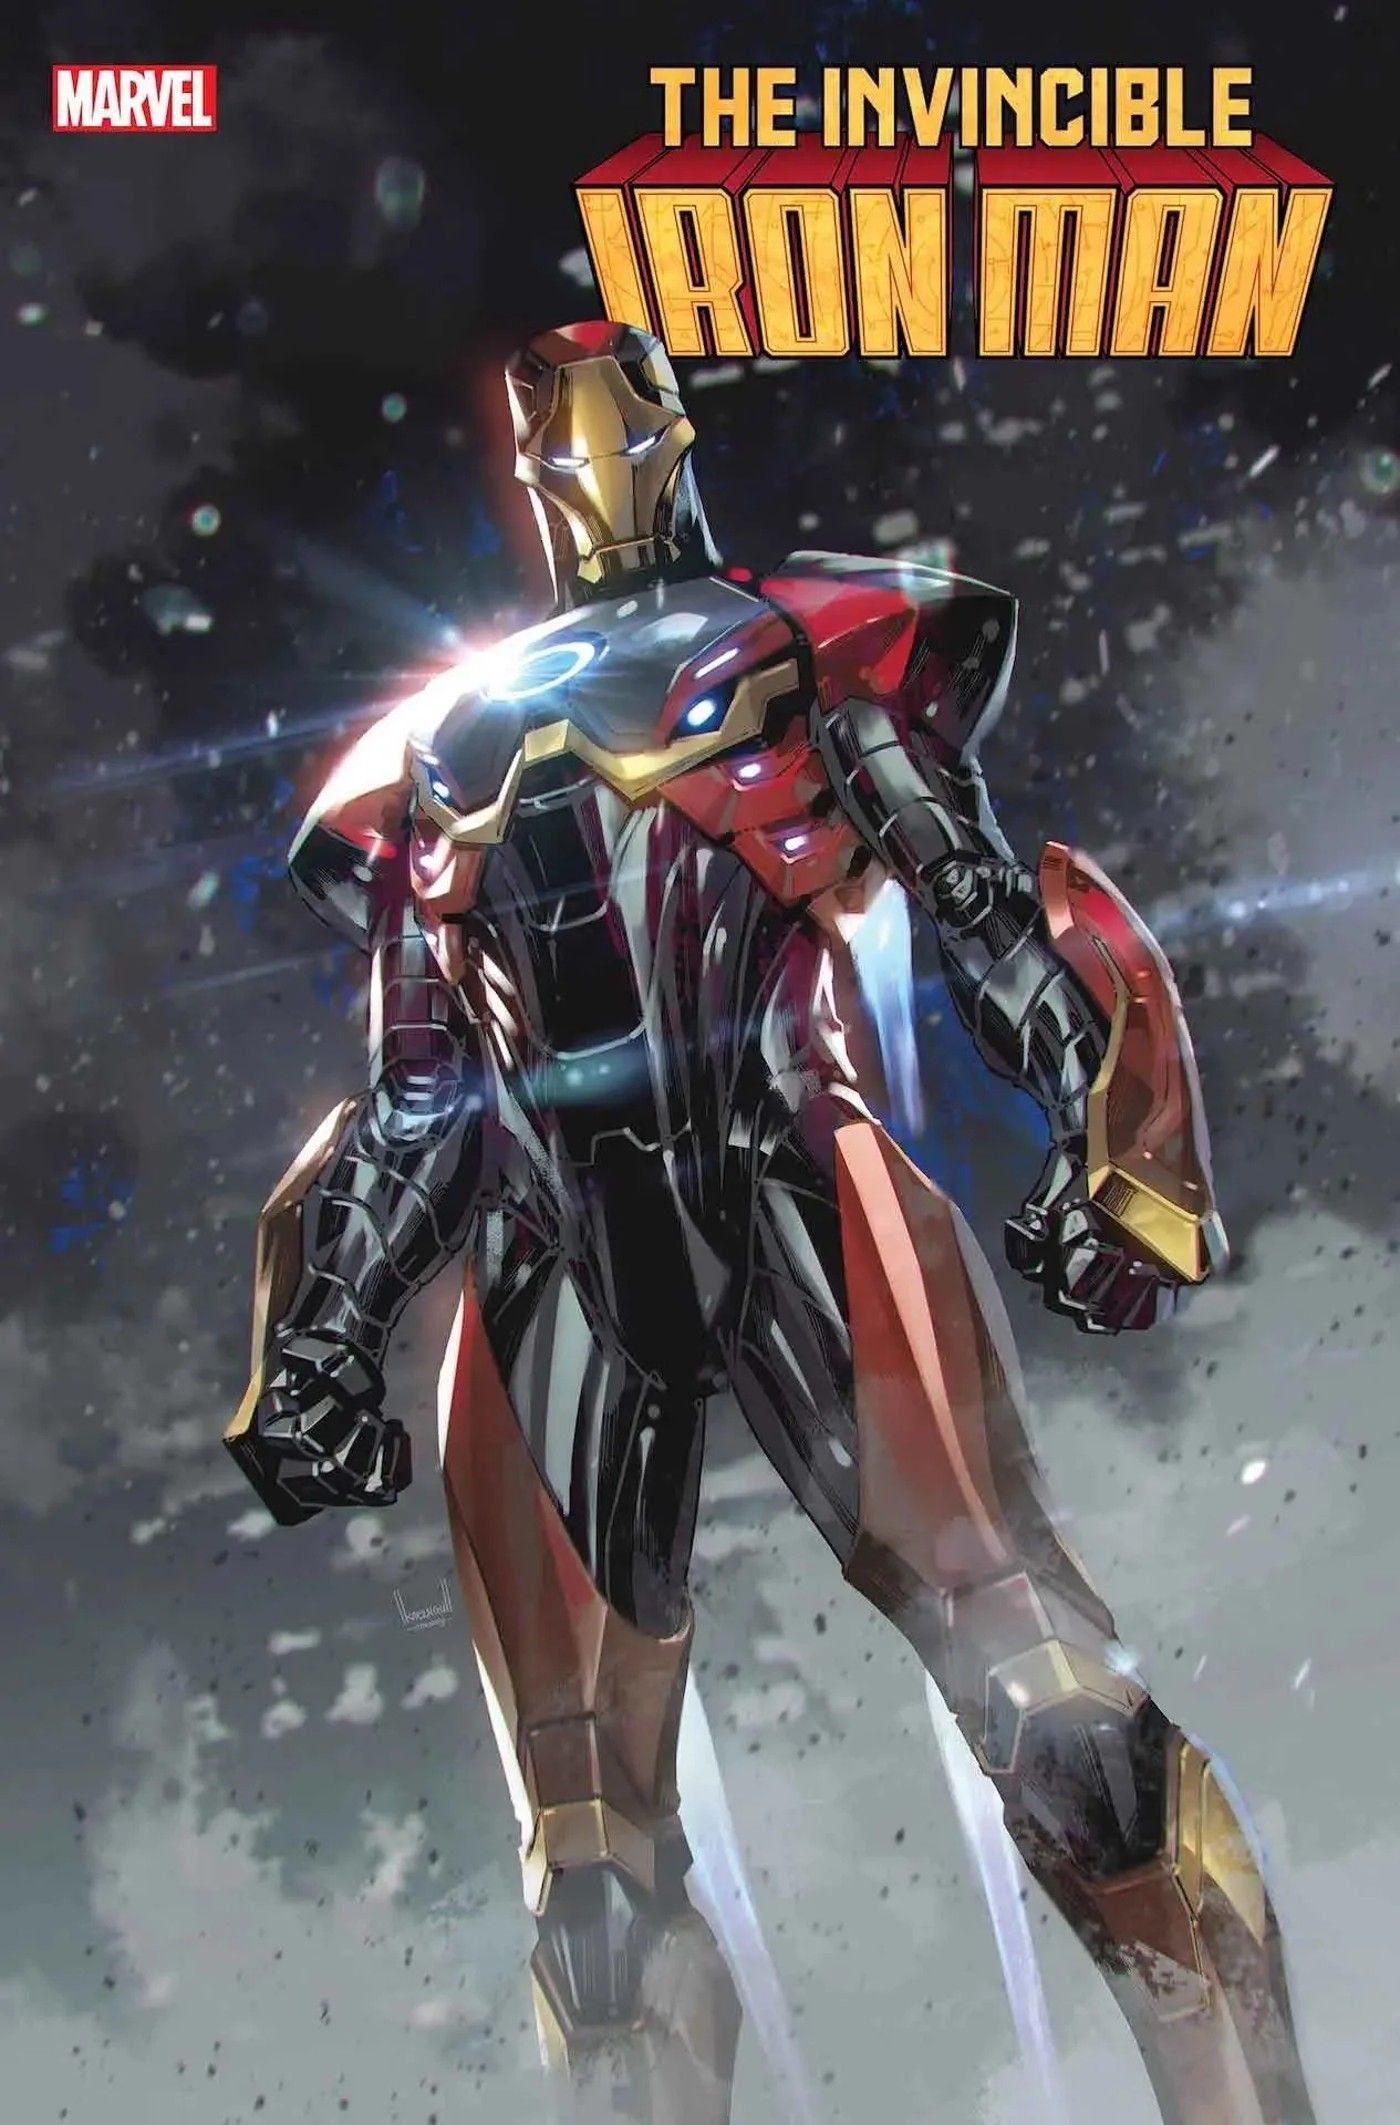 “His Most Dangerous Armor Yet”: 10 Iron Man Facts That Prove Tony Stark’s New Armor Is Unbeatable (& His Coolest Ever)